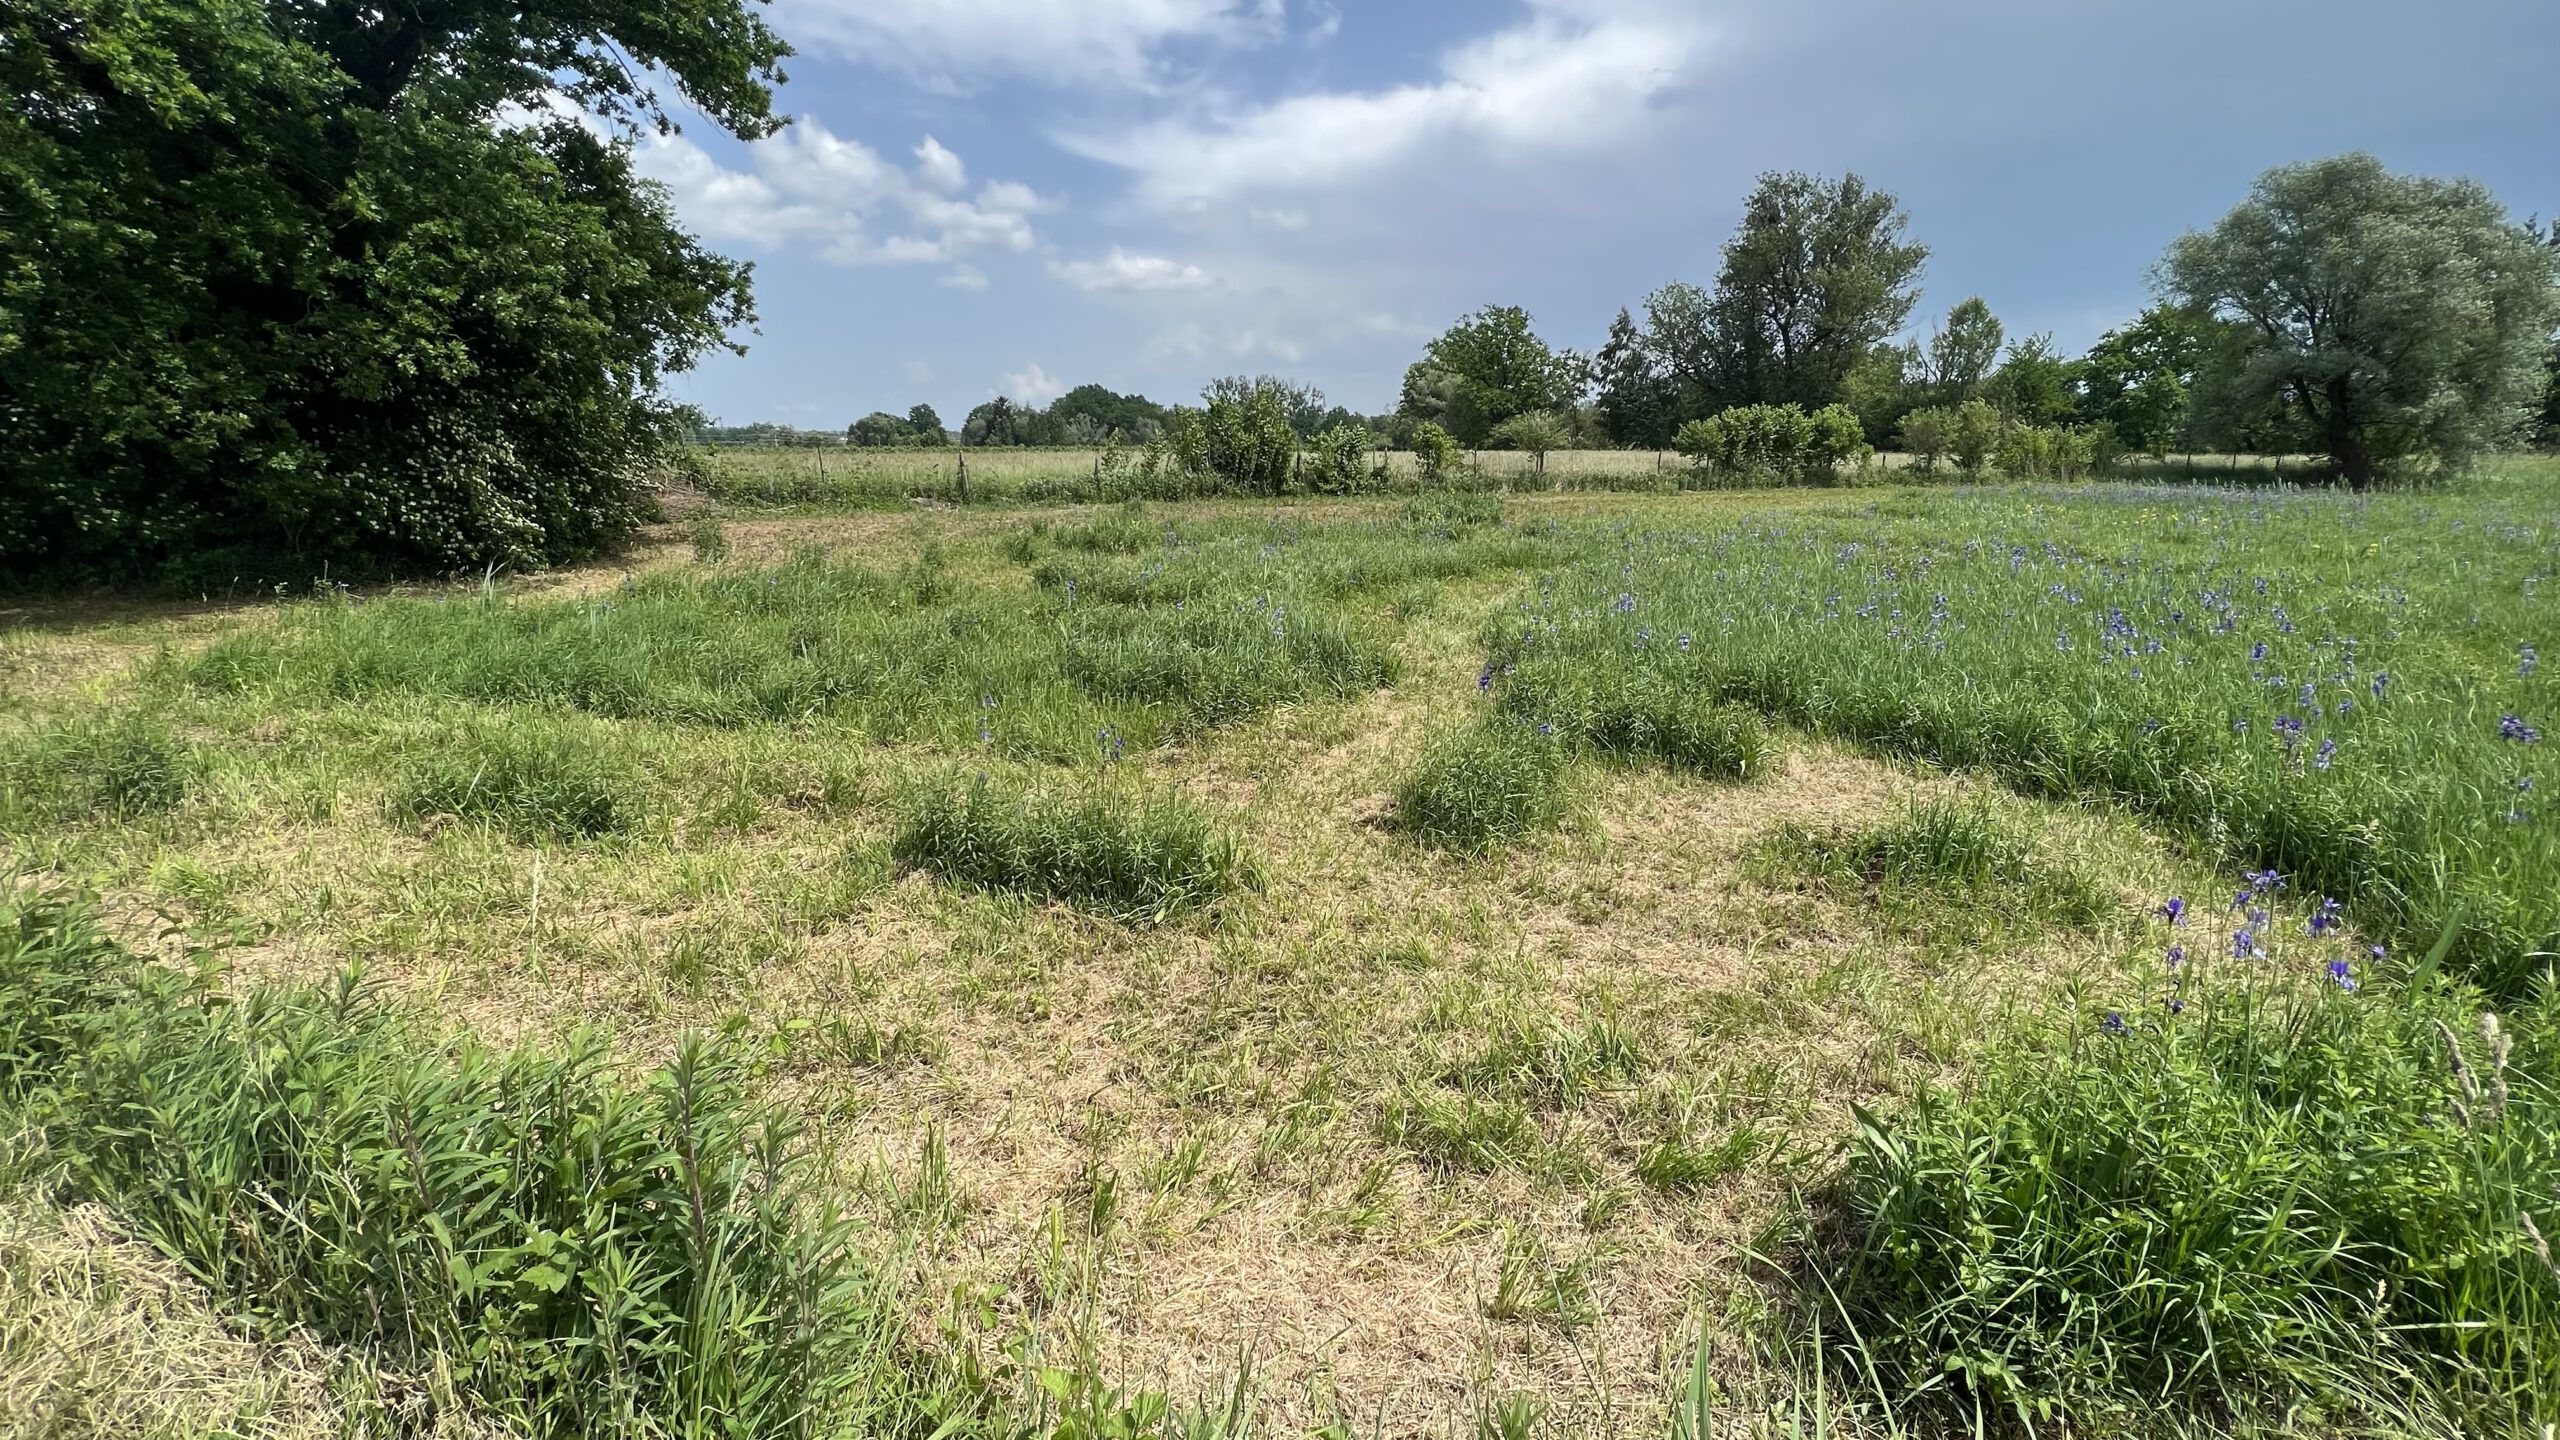 A mown meadow within the protected area. It has already fallen victim to Canadian goldenrod. The mown grass is already turning slightly brown. On the right edge are the iris flowers in an untouched section.